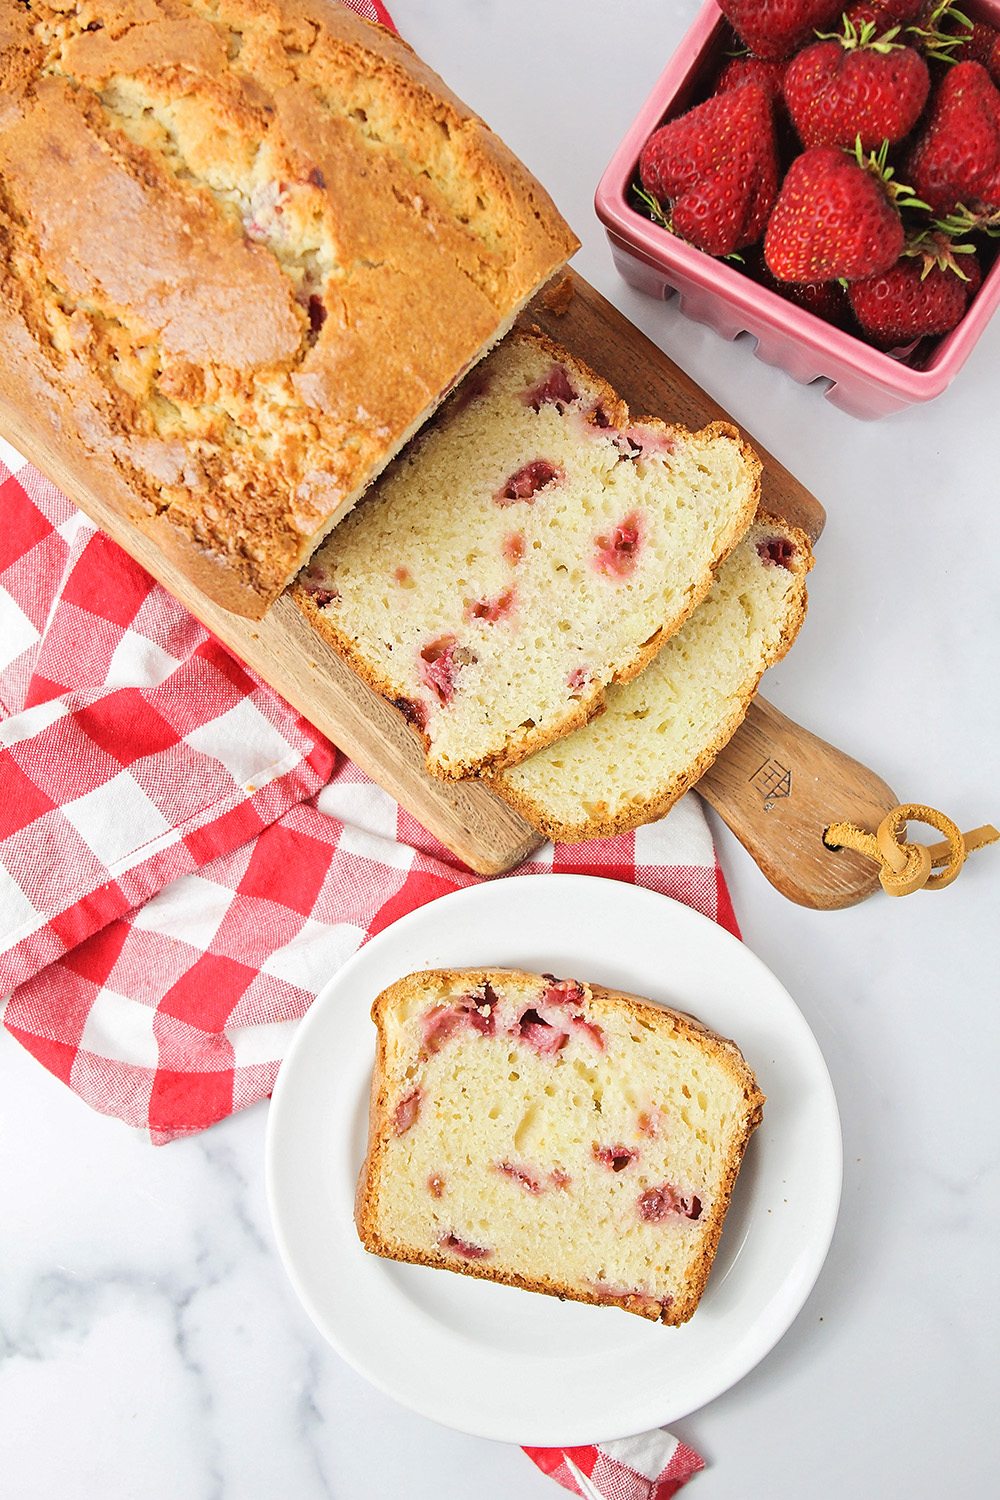 This tender and sweet strawberry cream cheese bread is so delicious, and so easy to make!